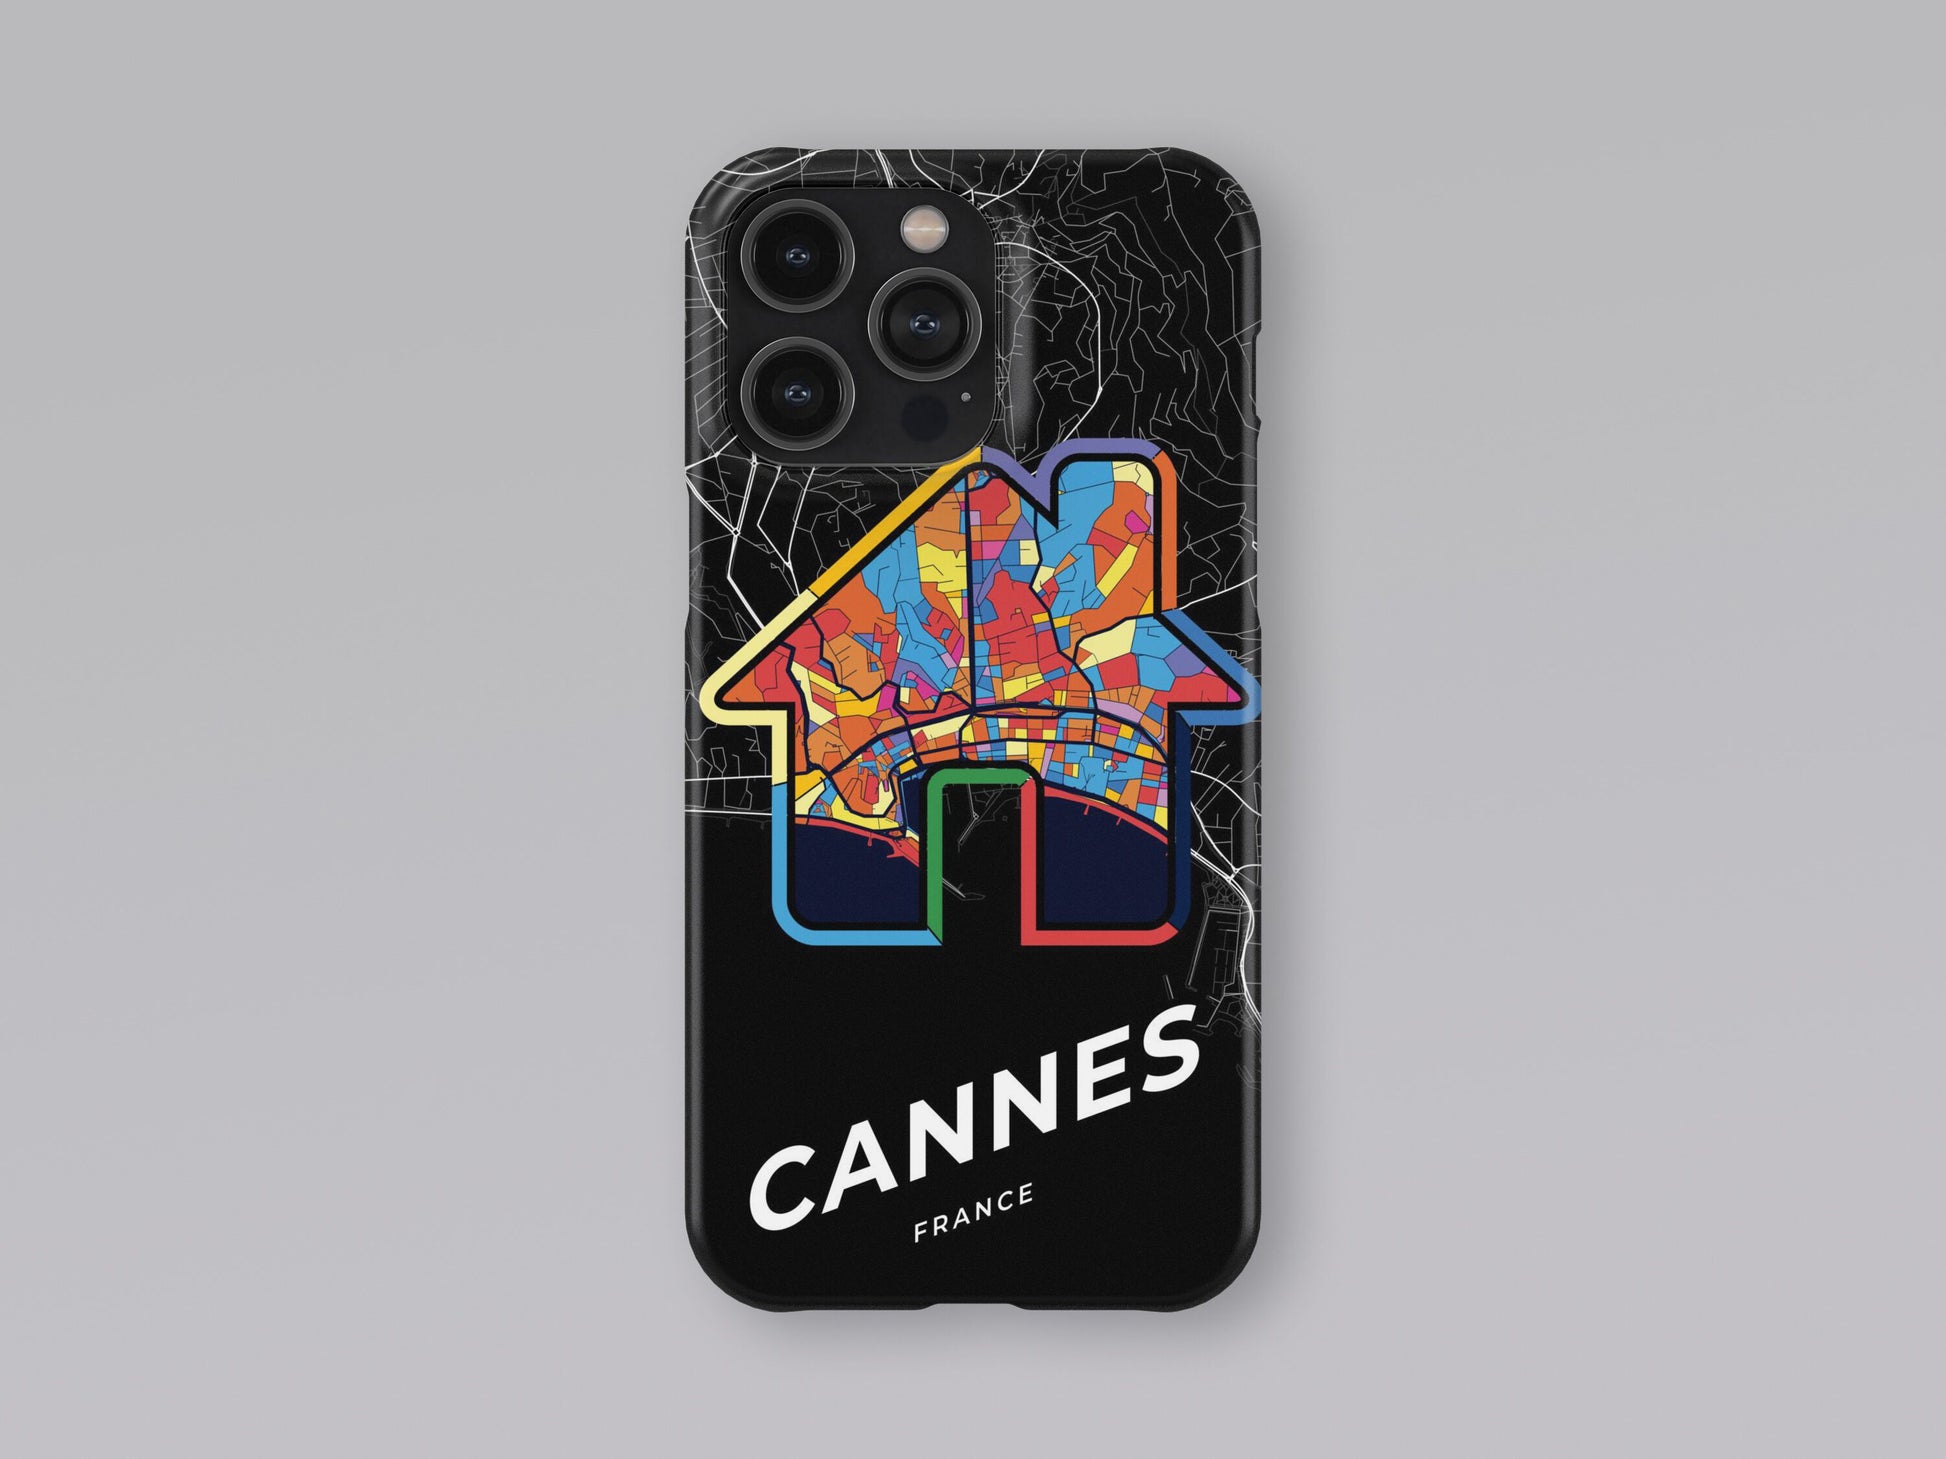 Cannes France slim phone case with colorful icon. Birthday, wedding or housewarming gift. Couple match cases. 3